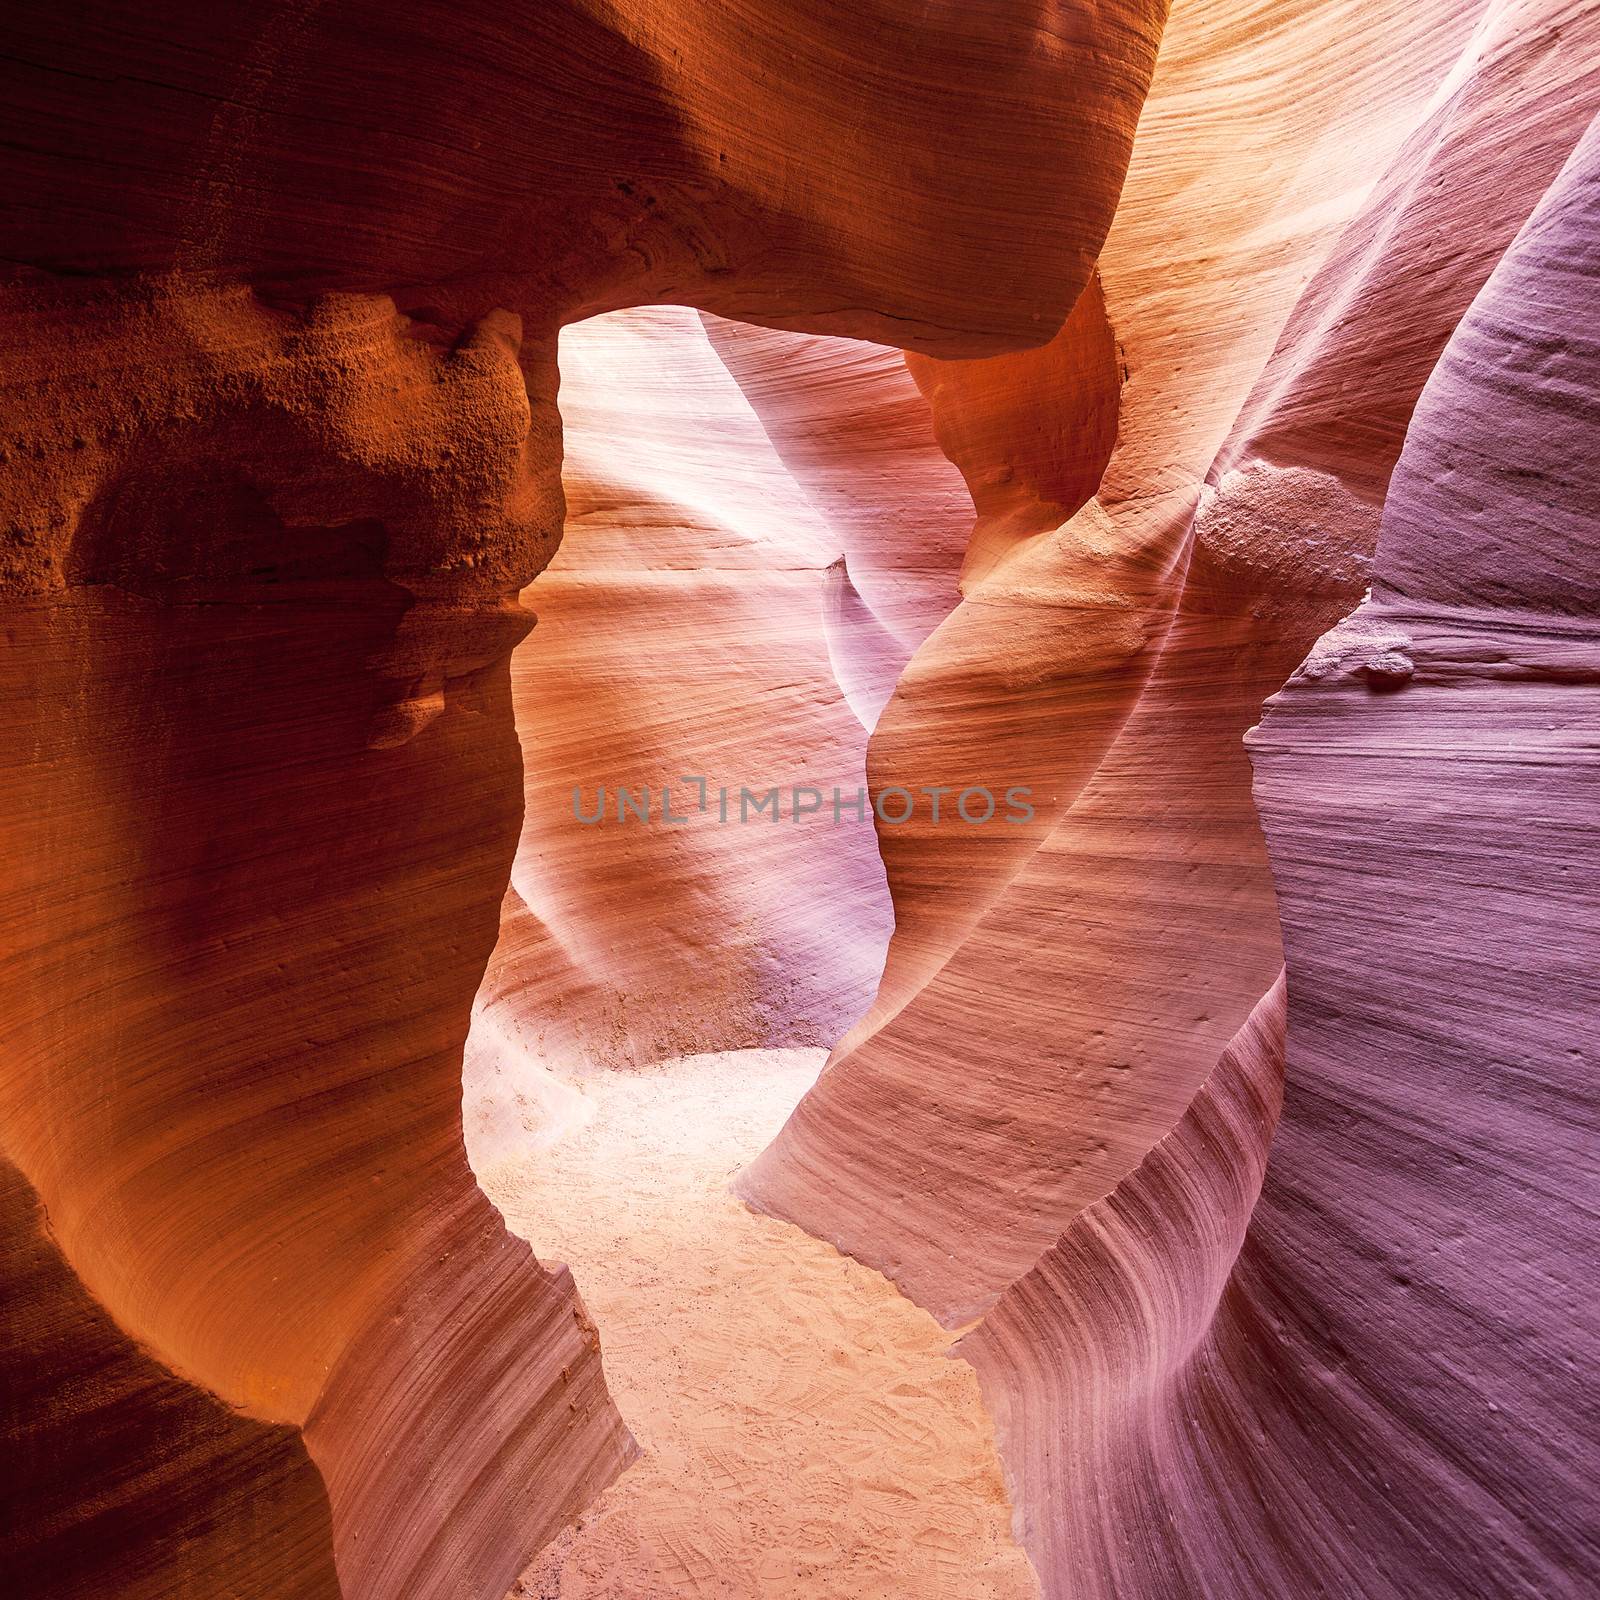 into the famous Antelope Canyon by vwalakte